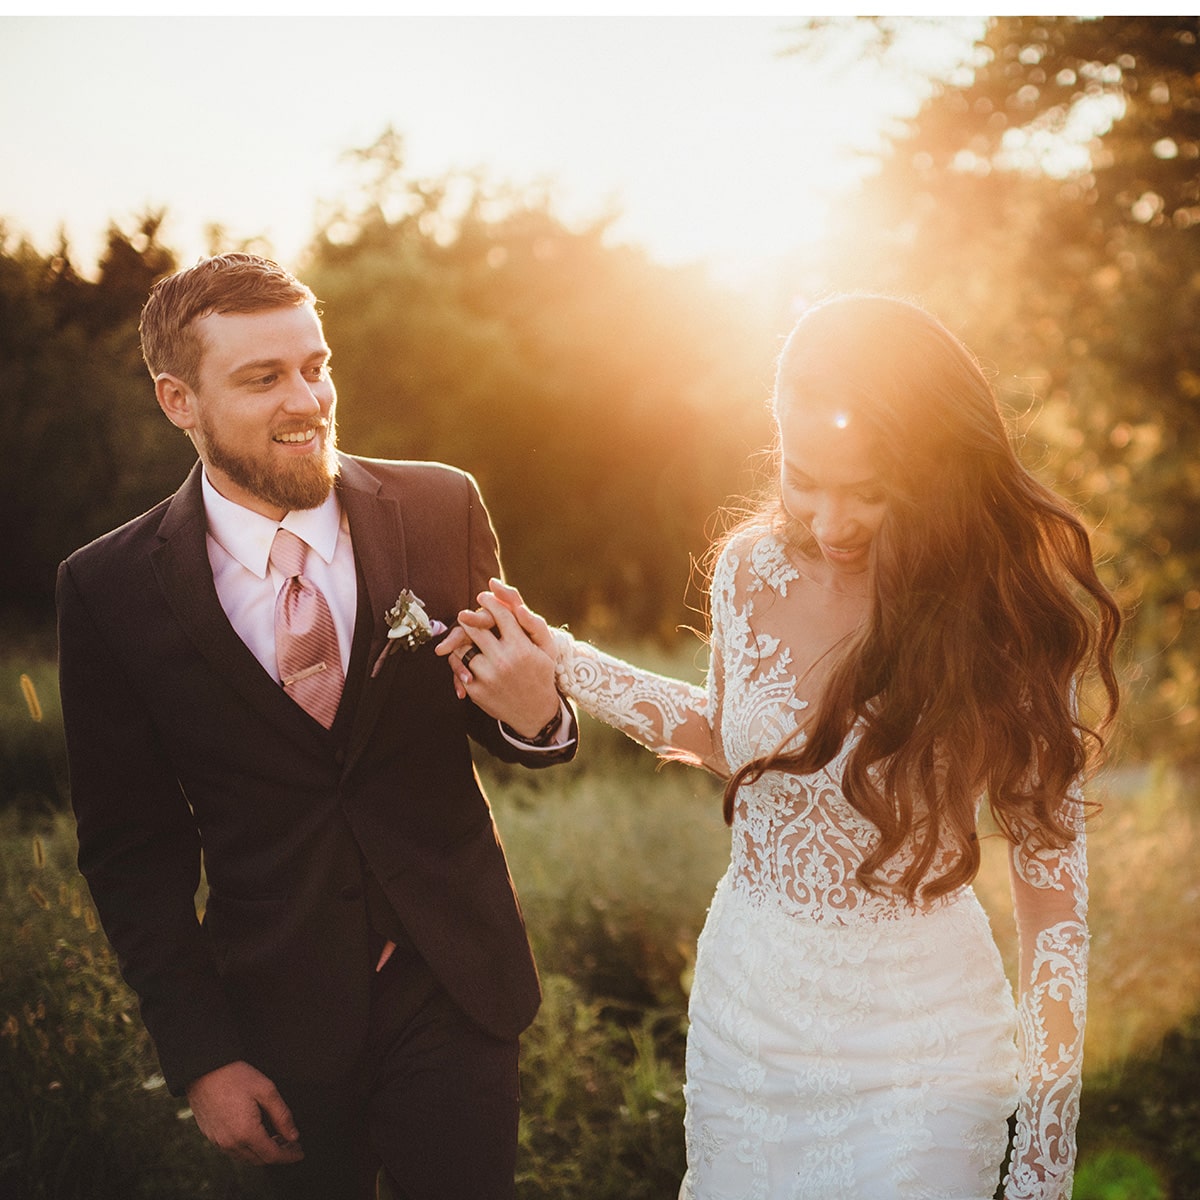 11 Wedding Pose Ideas You NEED To Do! - Breezy Photography